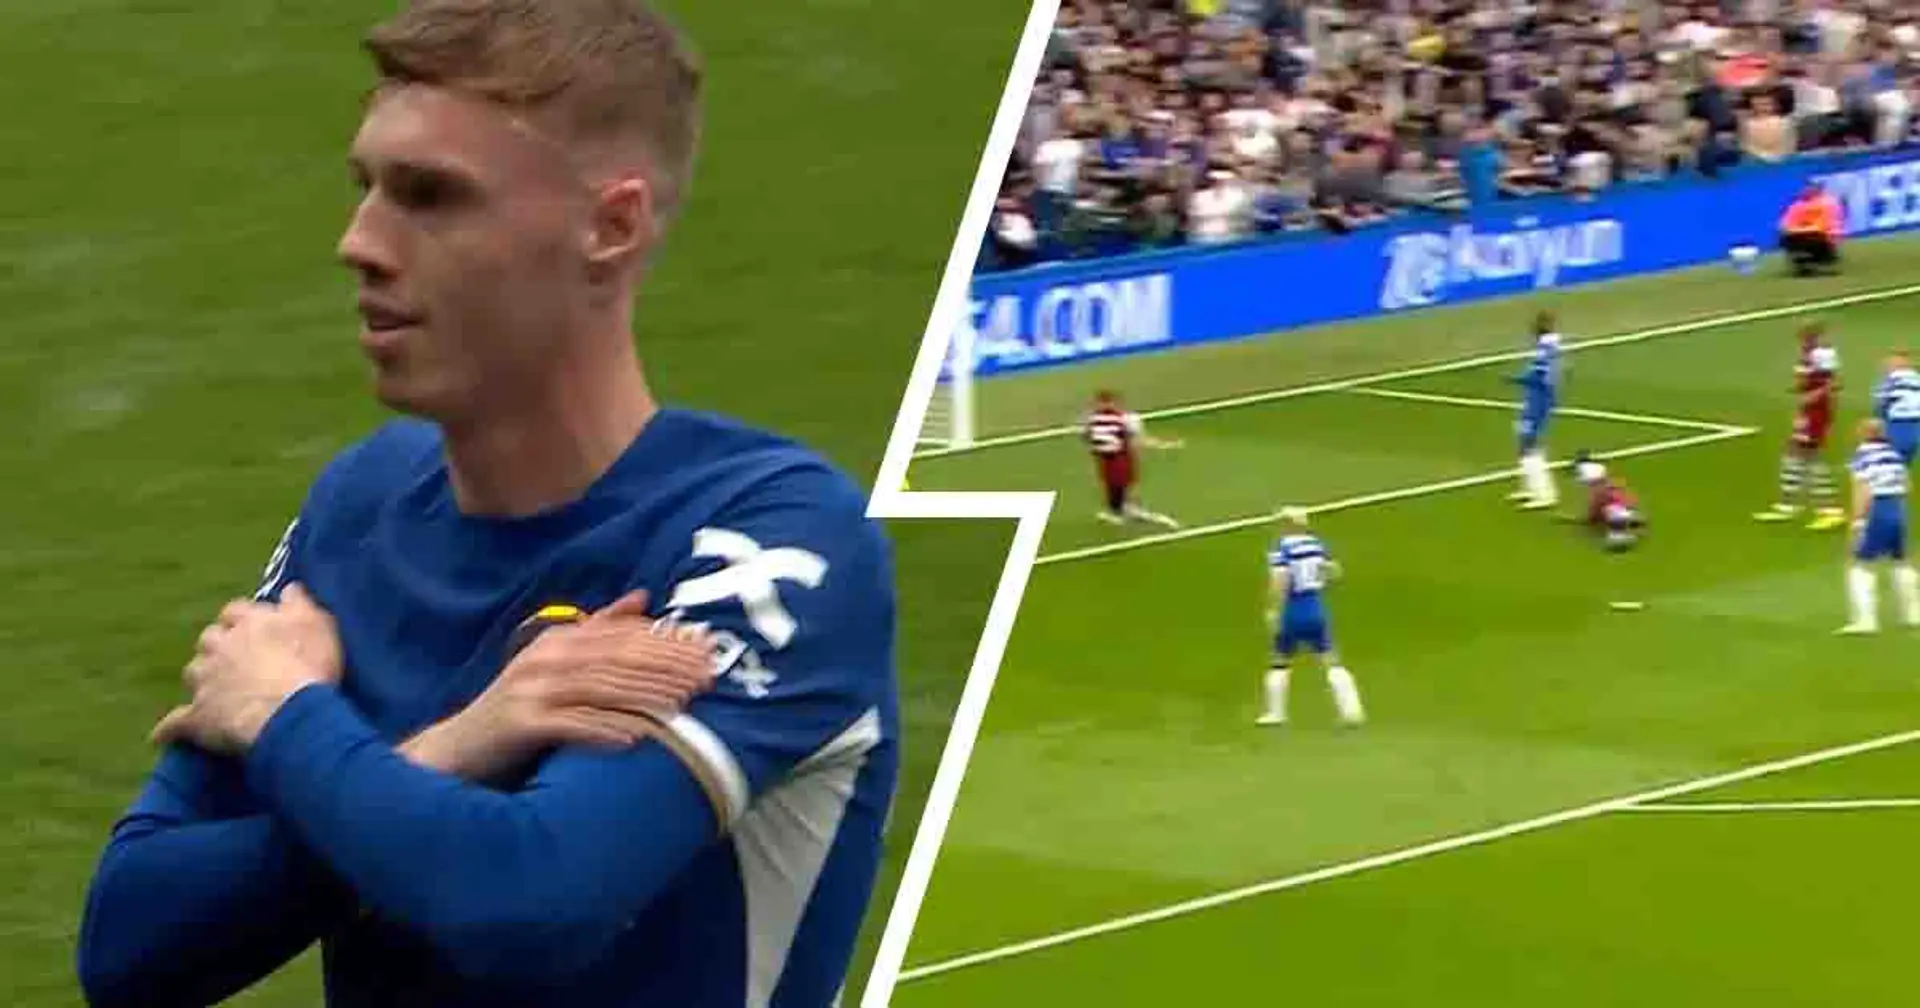 West Ham fans chant 'you've won f*** all' at Chelsea - Palmer shuts him up with clinical finish